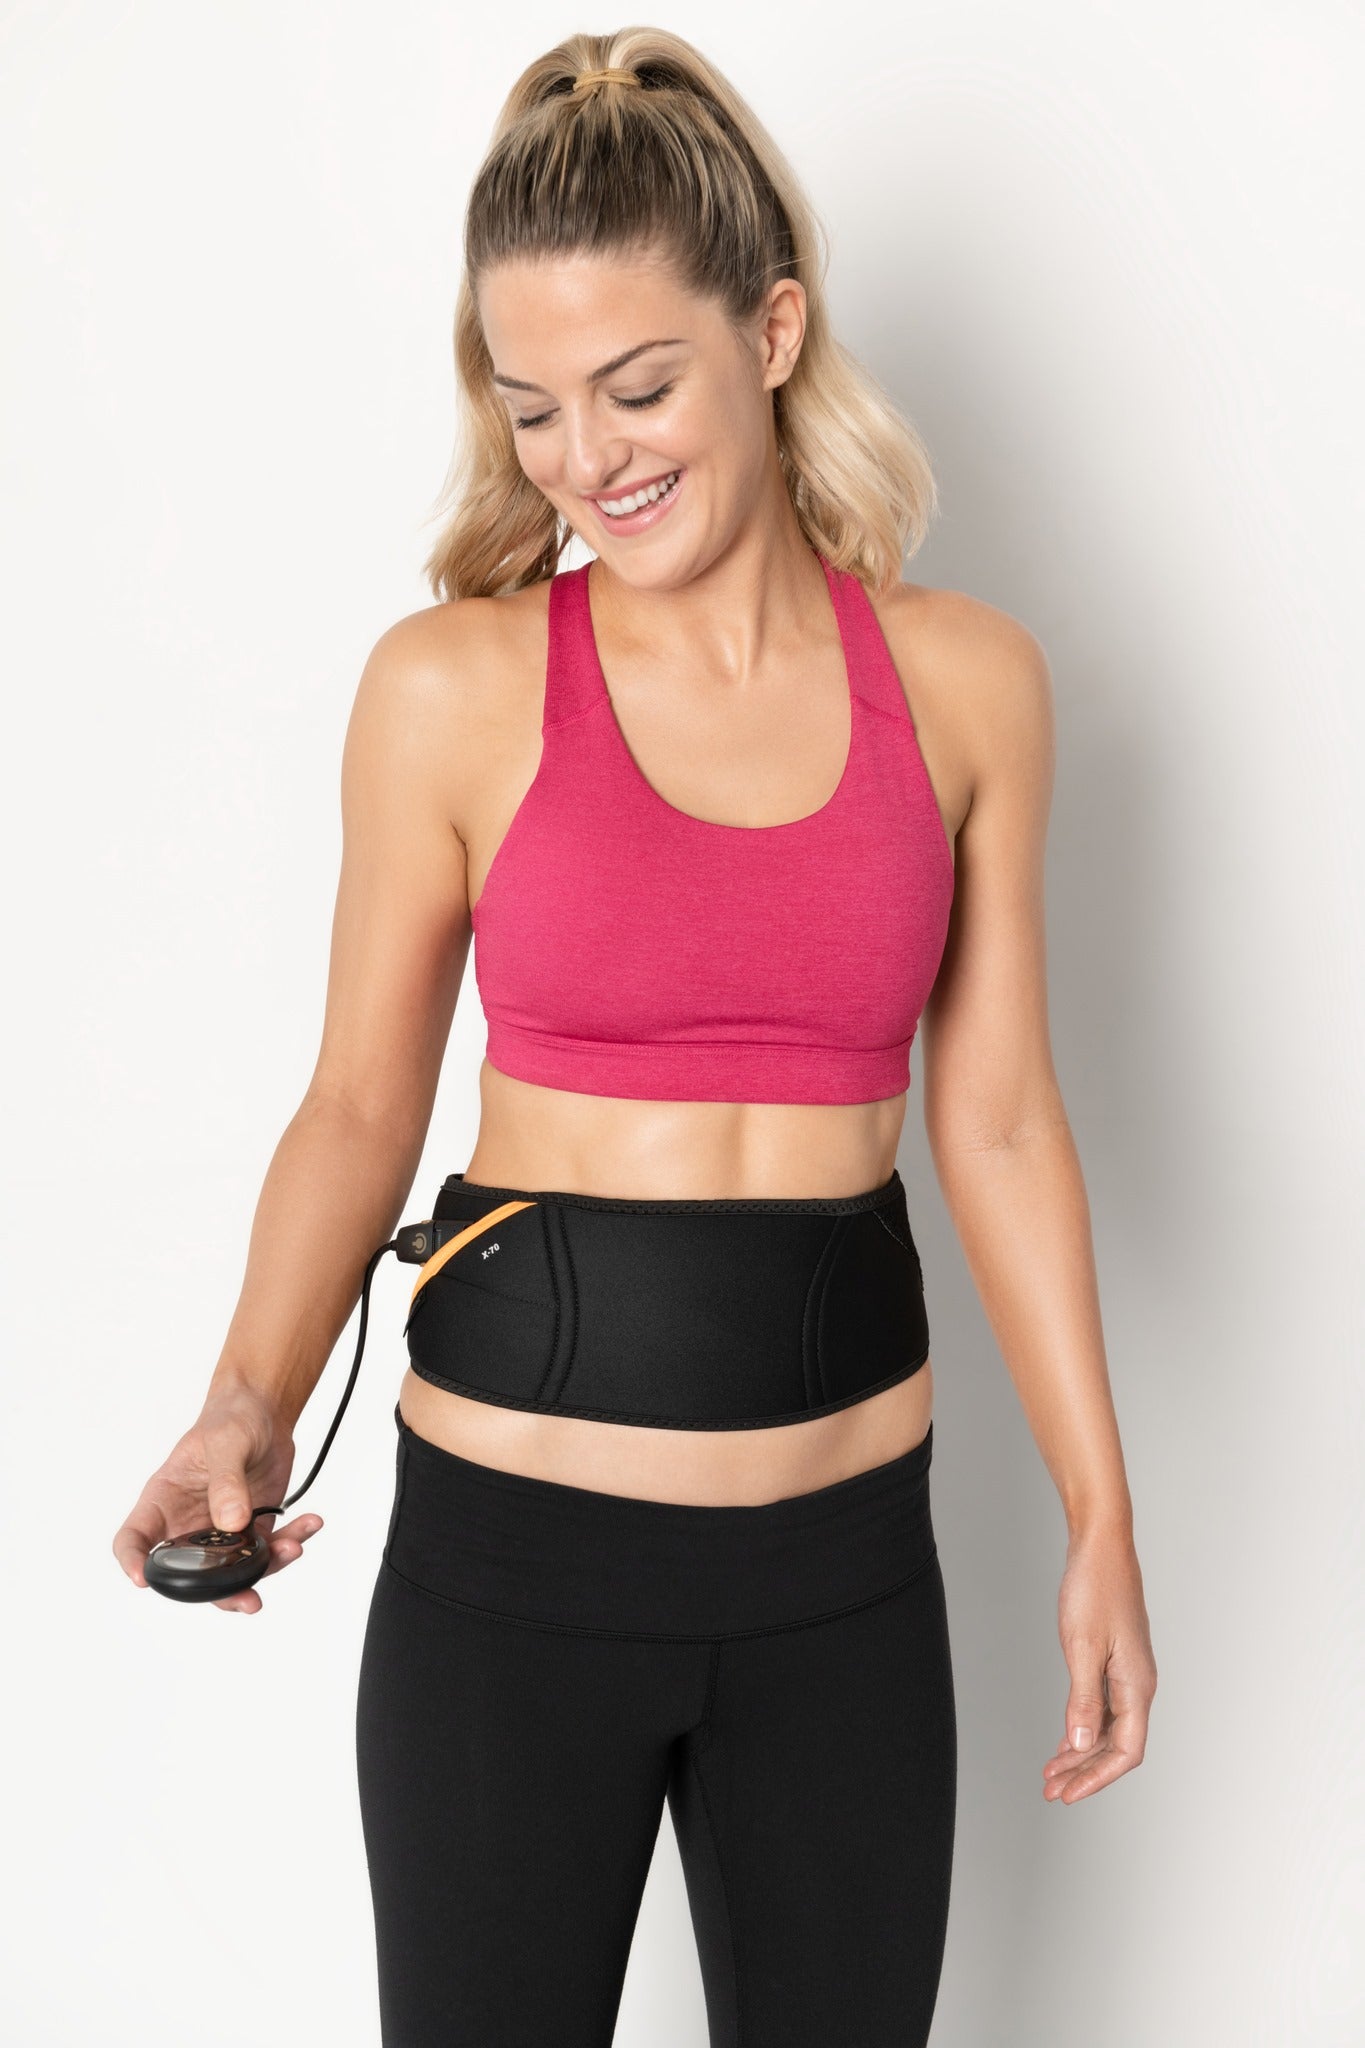 The NBody Ab Belt Toning System – Brands Just Pret Canada